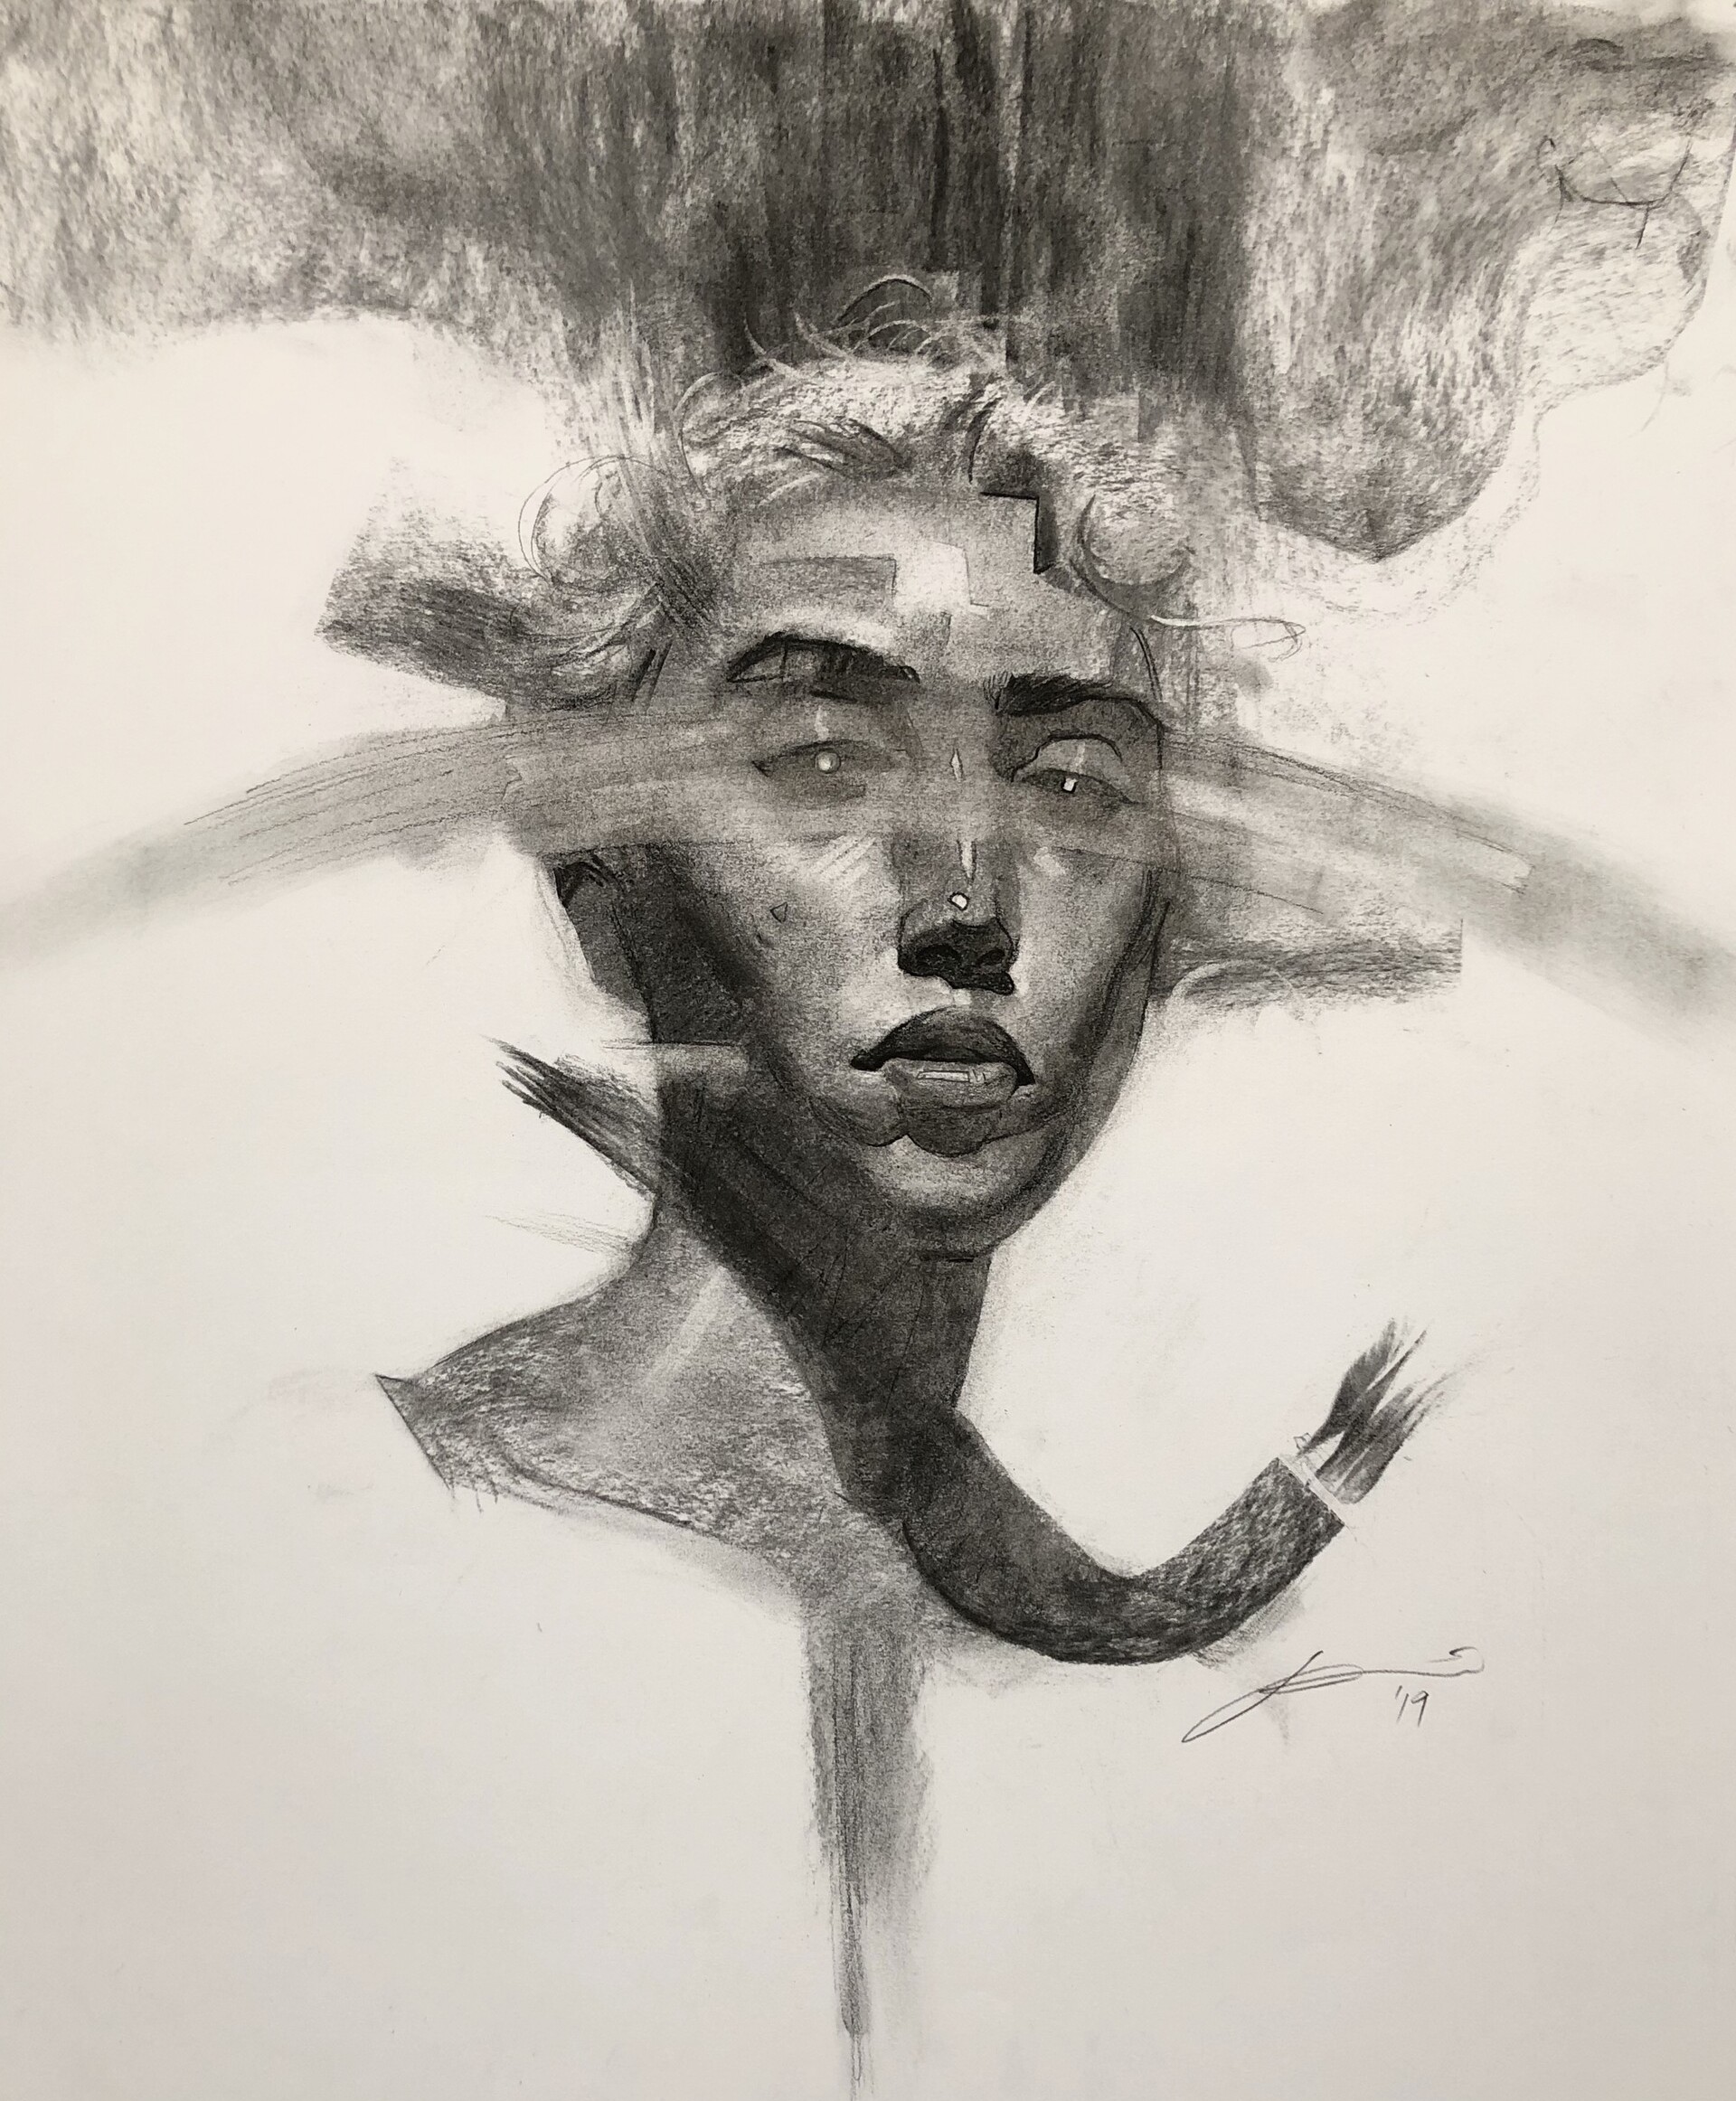 smudged charcoal sketch